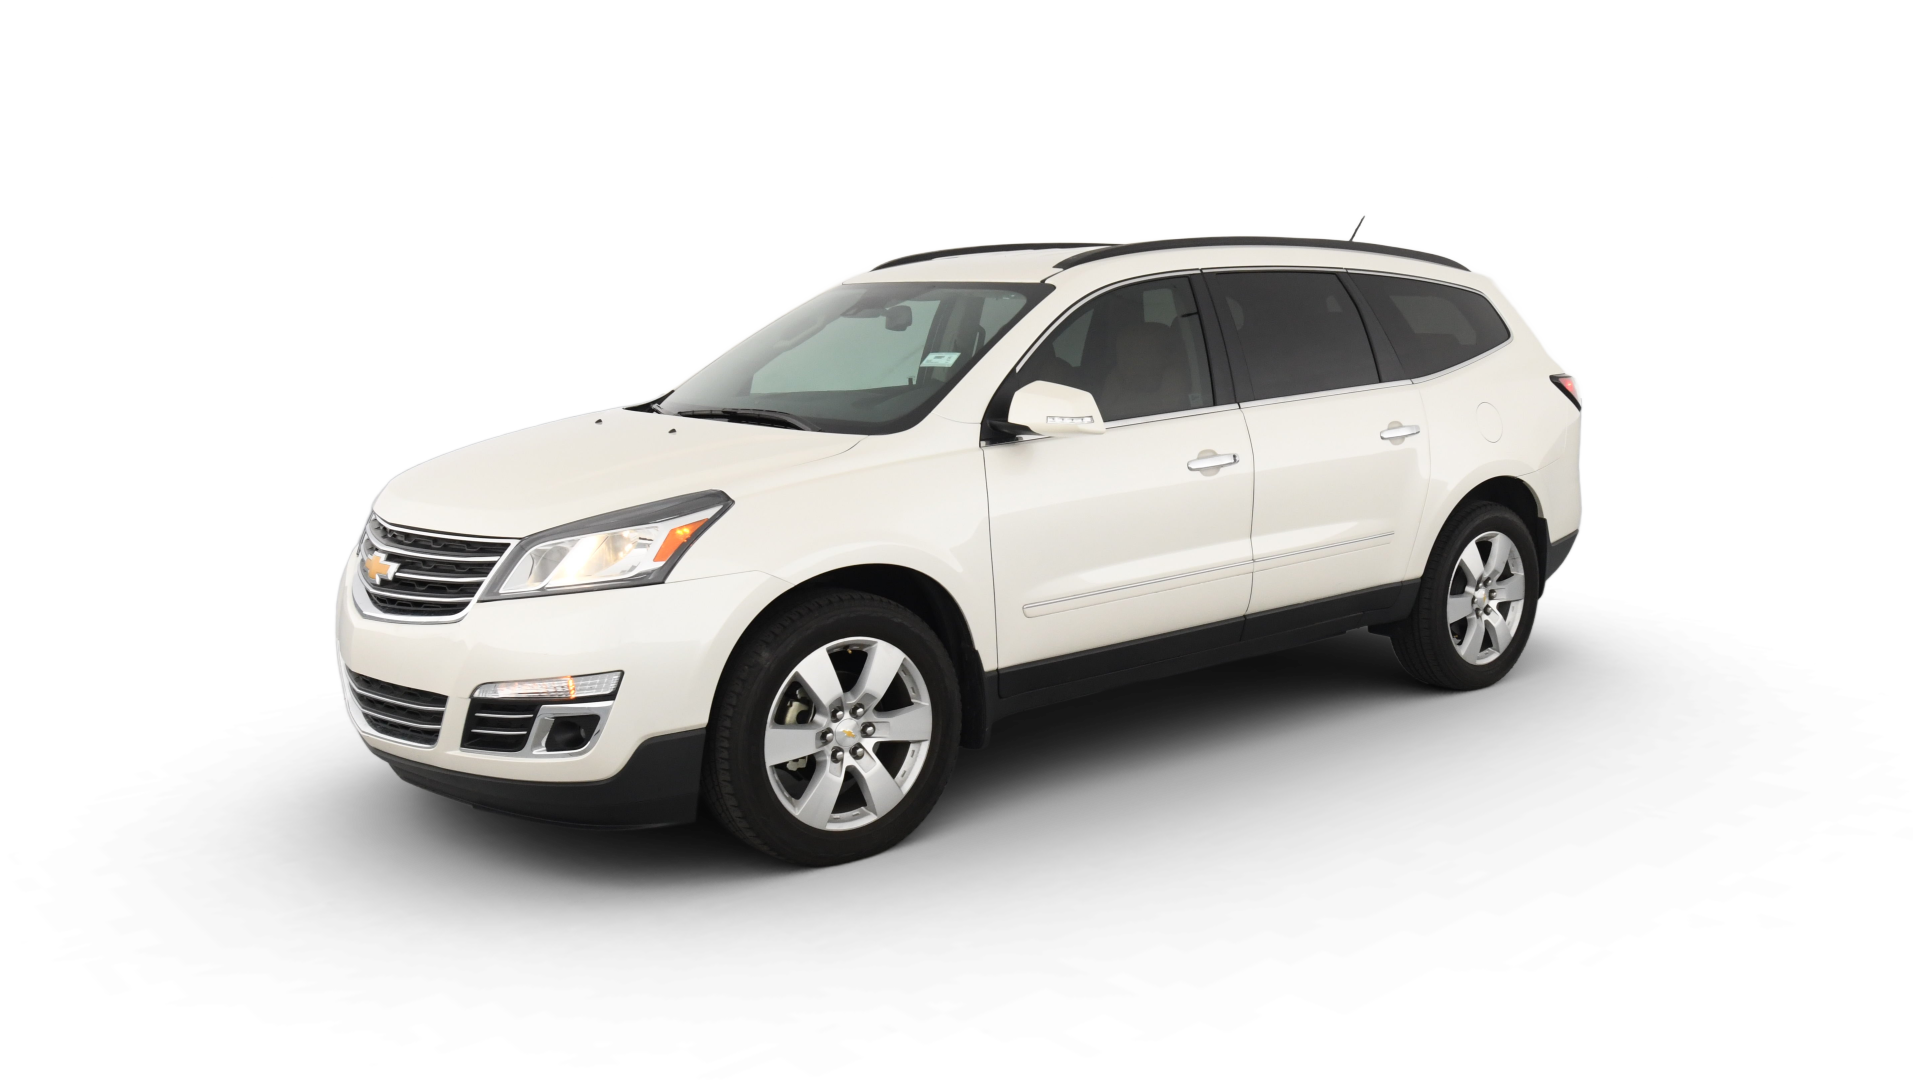 Used 2014 Chevrolet Traverse For Sale Online | Carvana